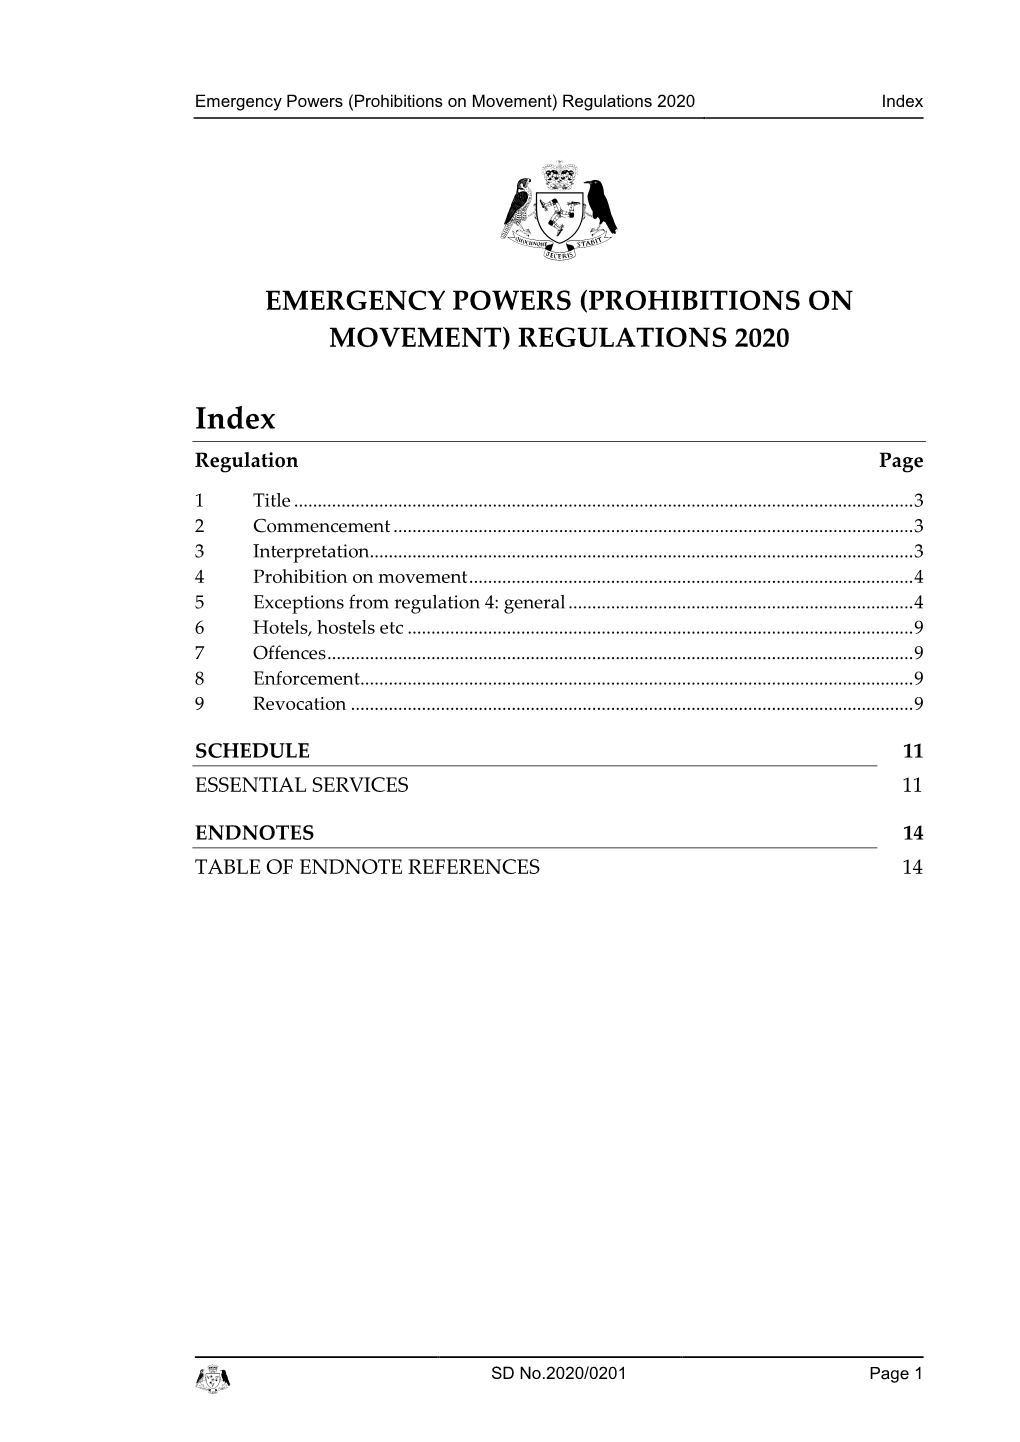 Emergency Powers (Prohibitions on Movement) Regulations 2020 Index